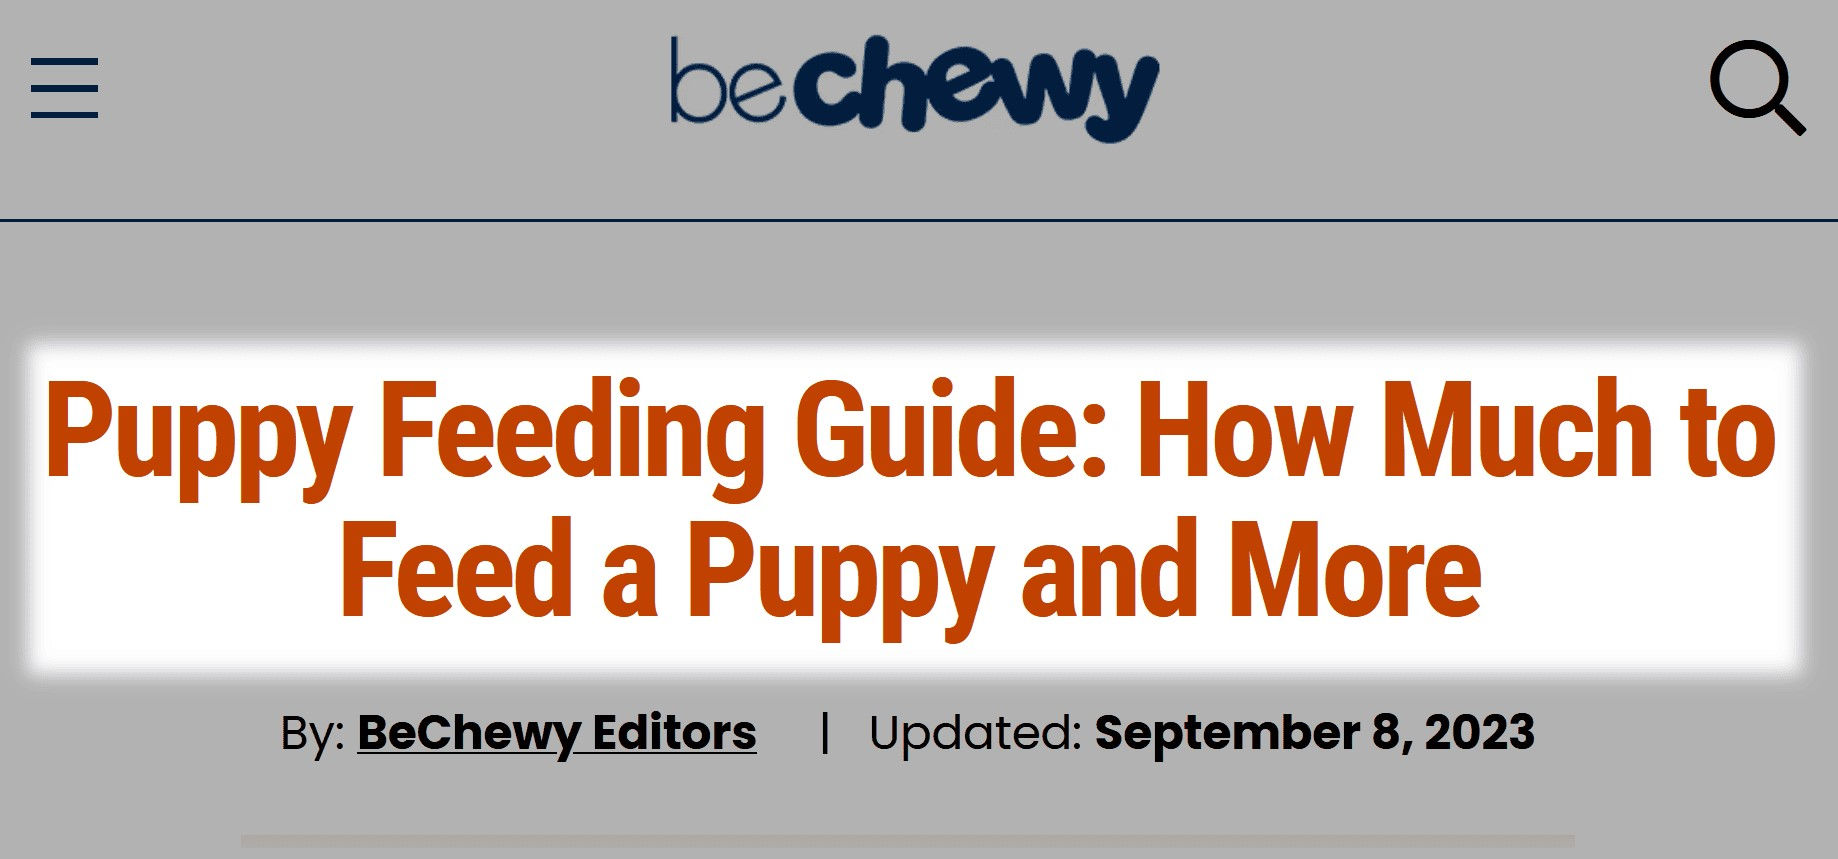 bechewy's H1 "Puppy Feeding Guide: How Much to Feed a Puppy and More"